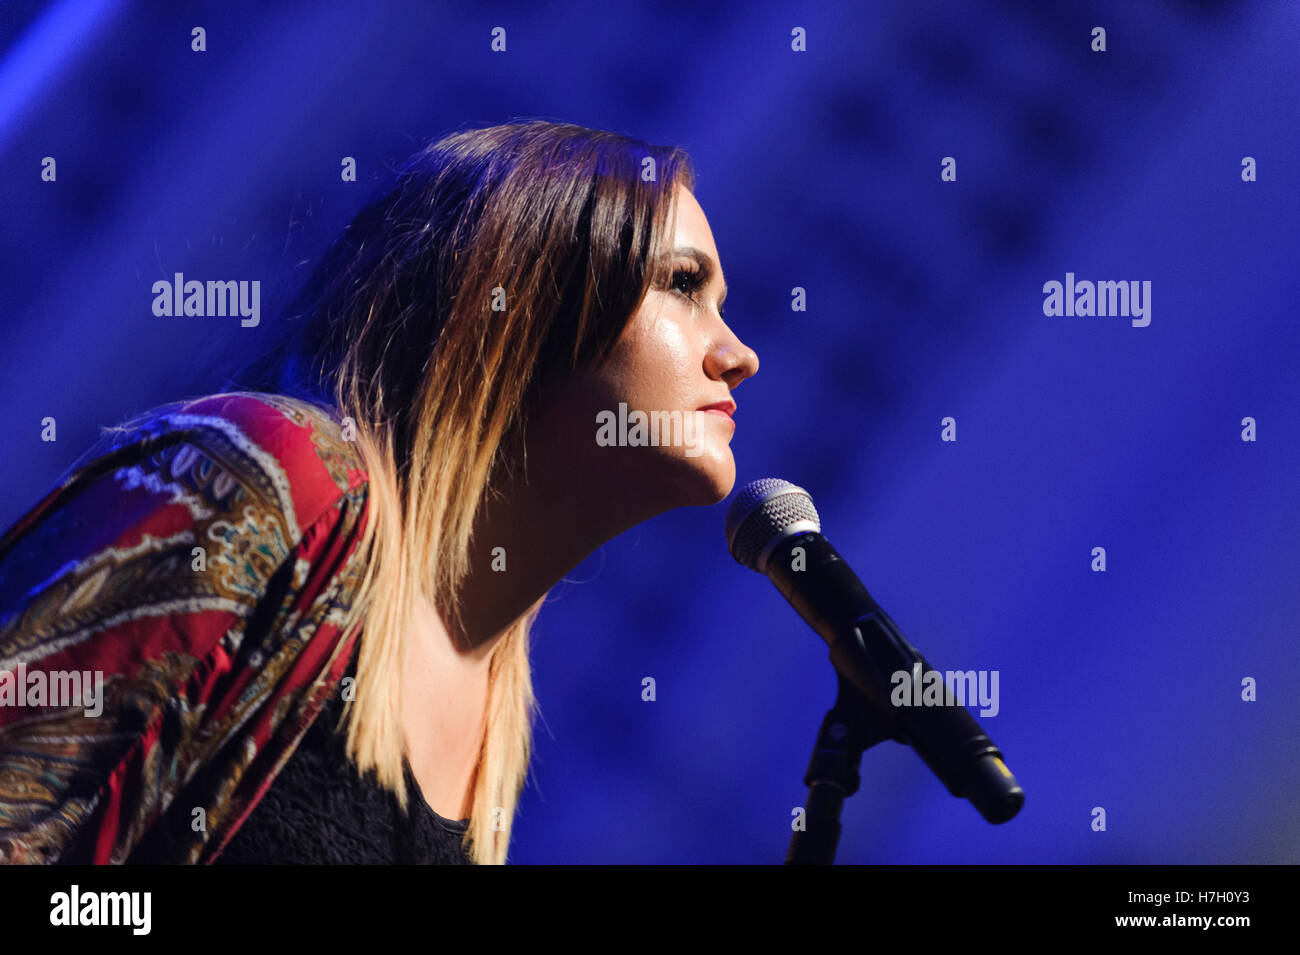 Liverpool, UK. 4th November 2016. Singer, Chelsea Alice Scott, during soundcheck, before performing as support for Rebecca Ferguson during her UK 'Superwoman' tour, at the Liverpool Philharmonic Hall © Paul Warburton Stock Photo